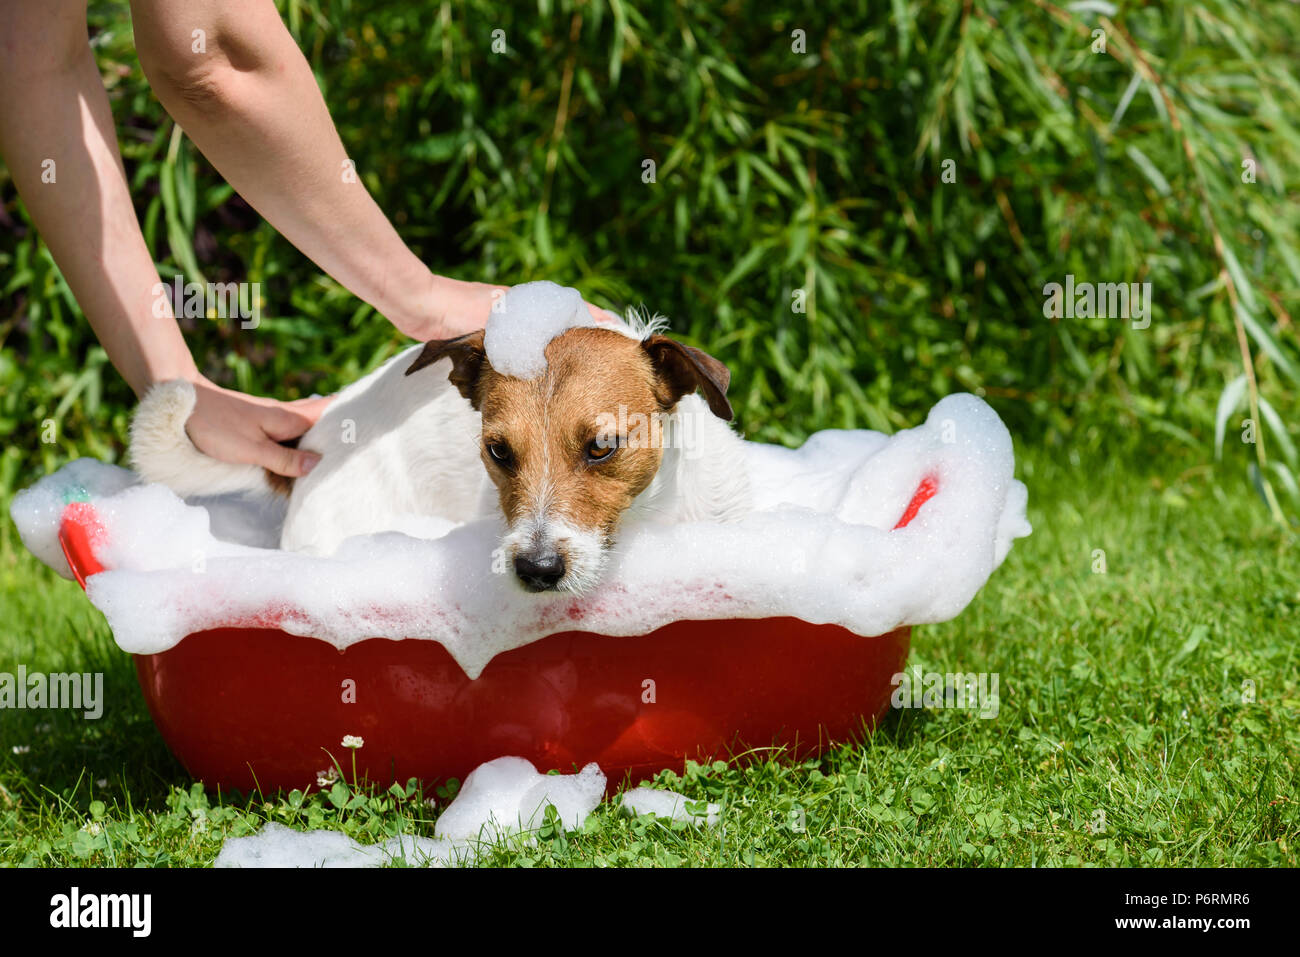 Pet spa care: dog takes a bath at hot summer day Stock Photo